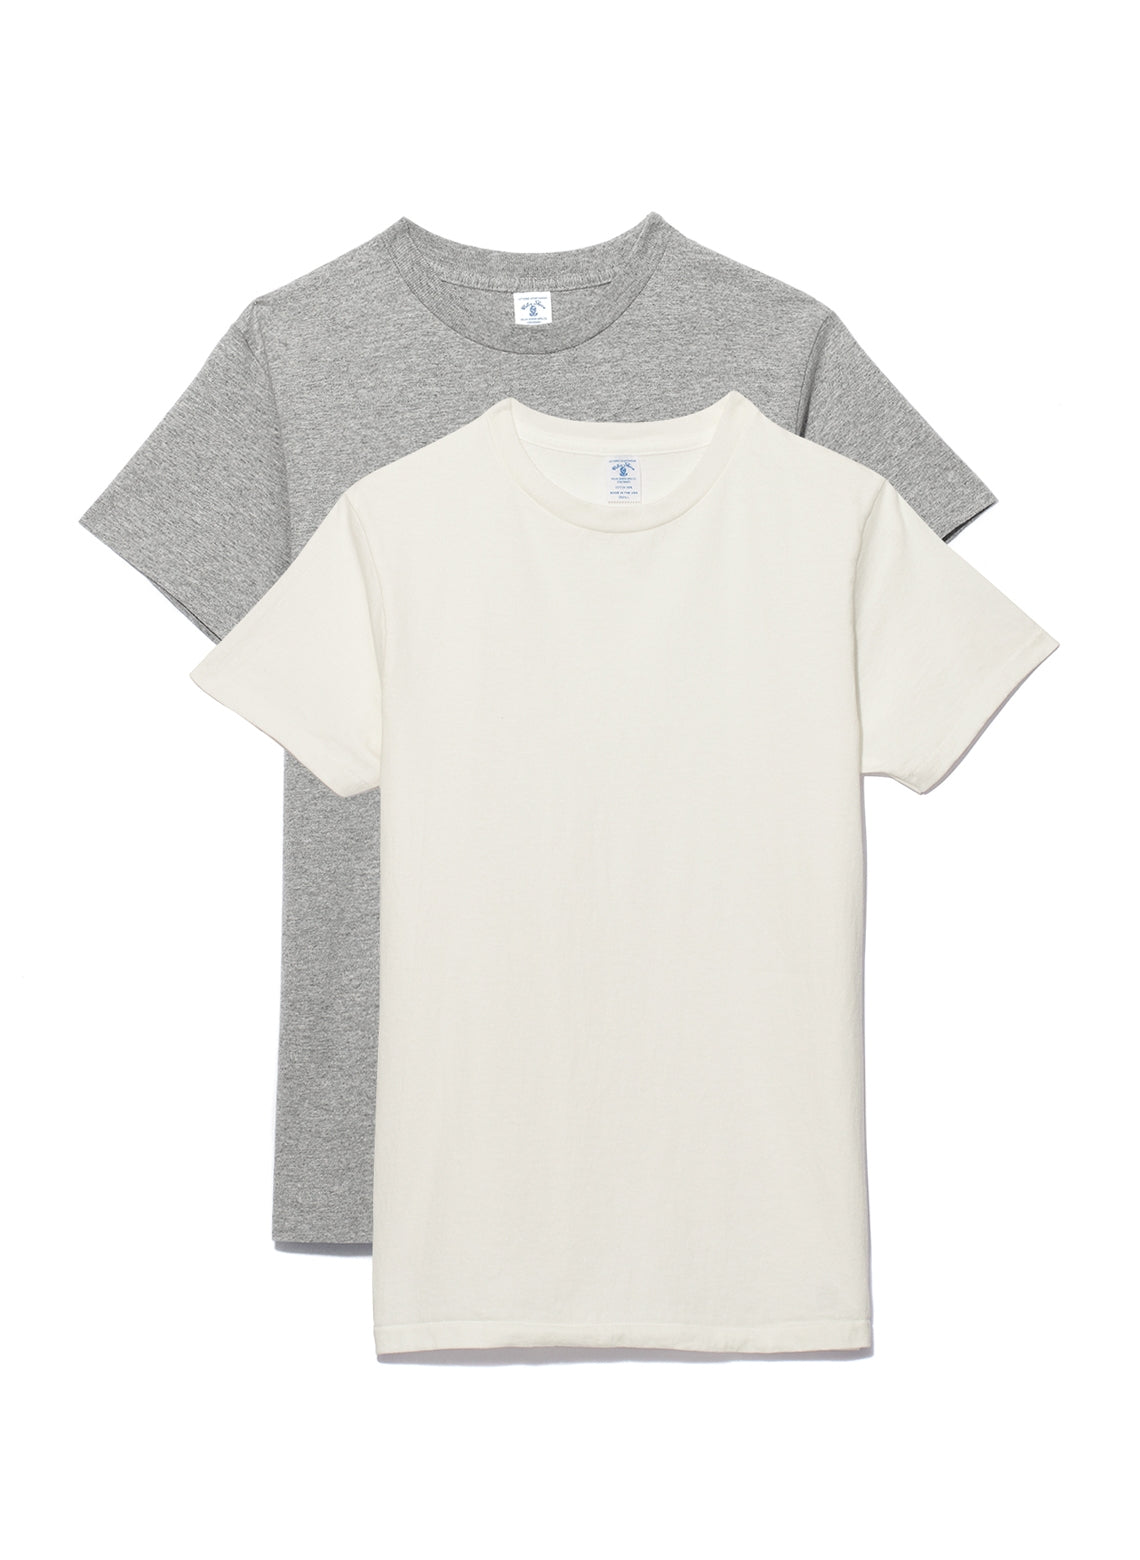 Pack 2 Tee Shirts Col Rond Blanc et Gris